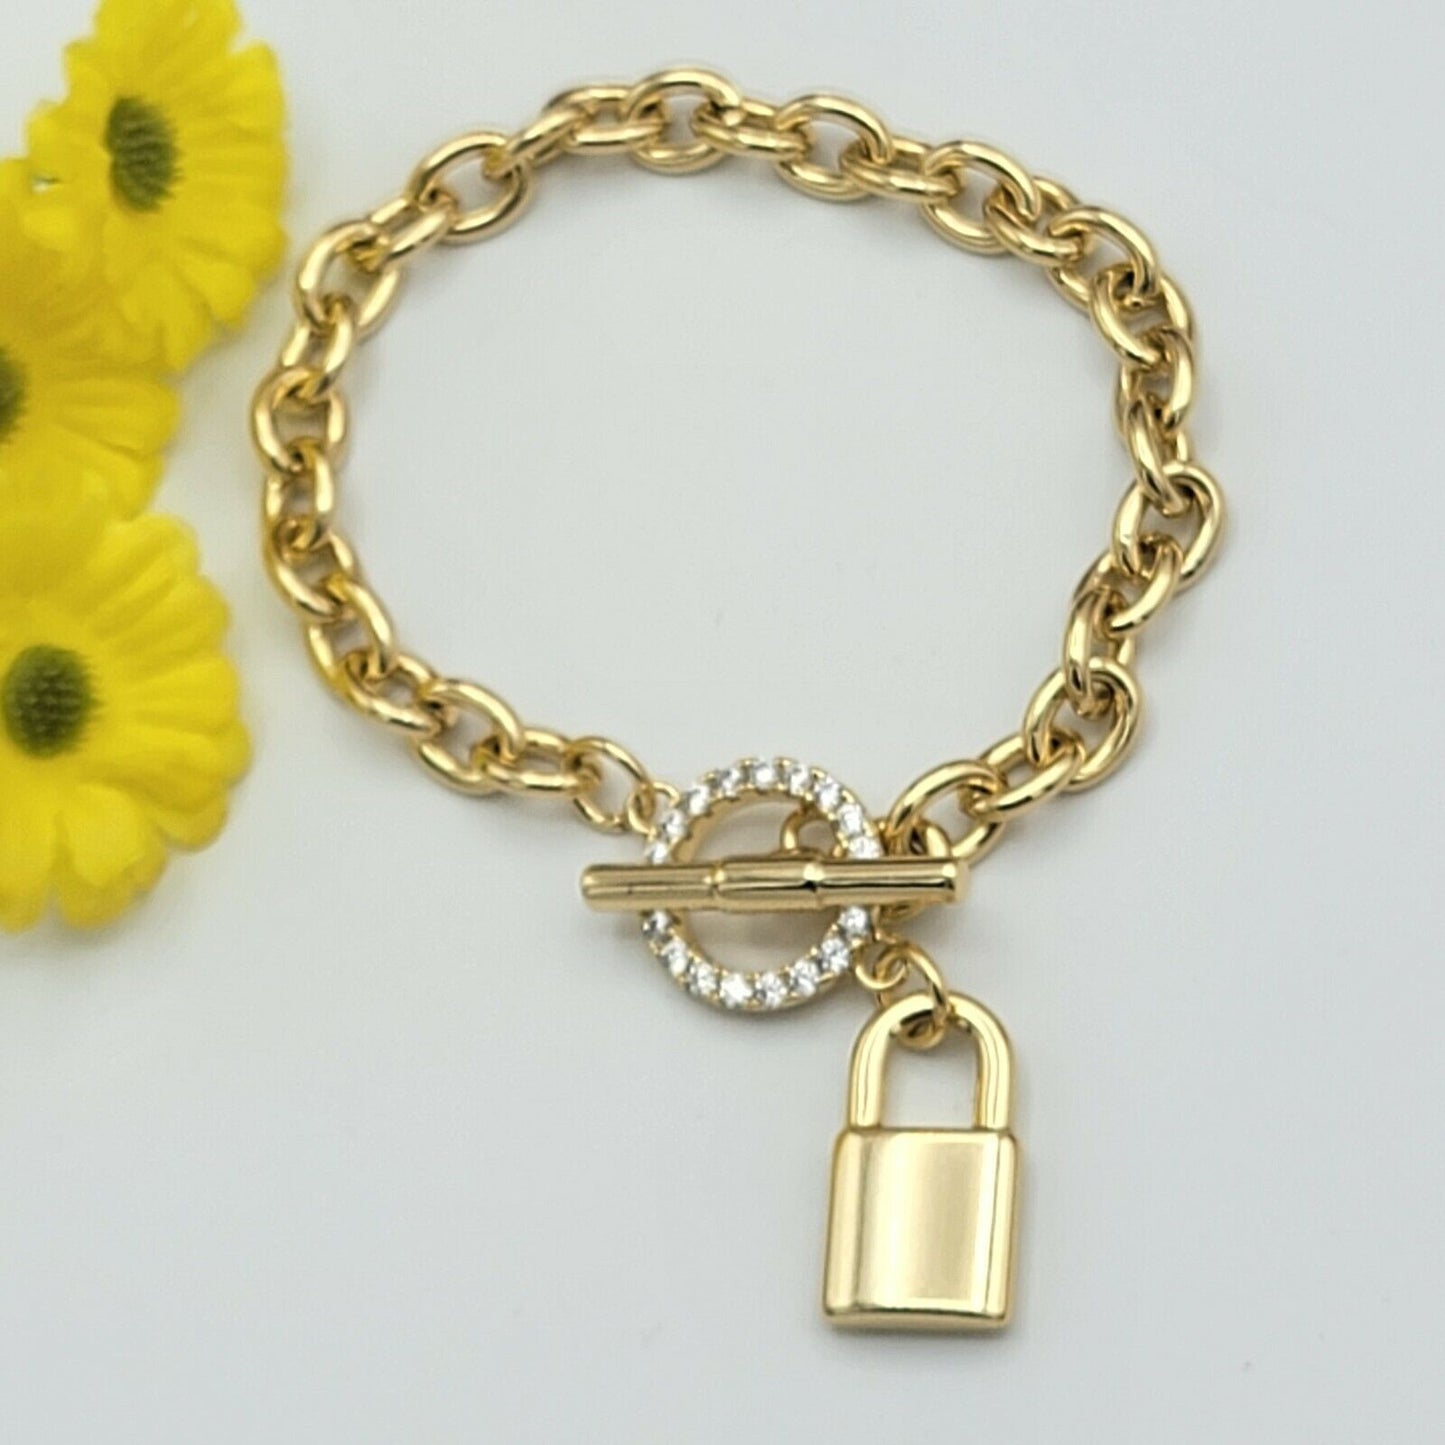 Bracelets - 14K Gold Plated. Padlock Charm Chain - Small Wrists 6.5in